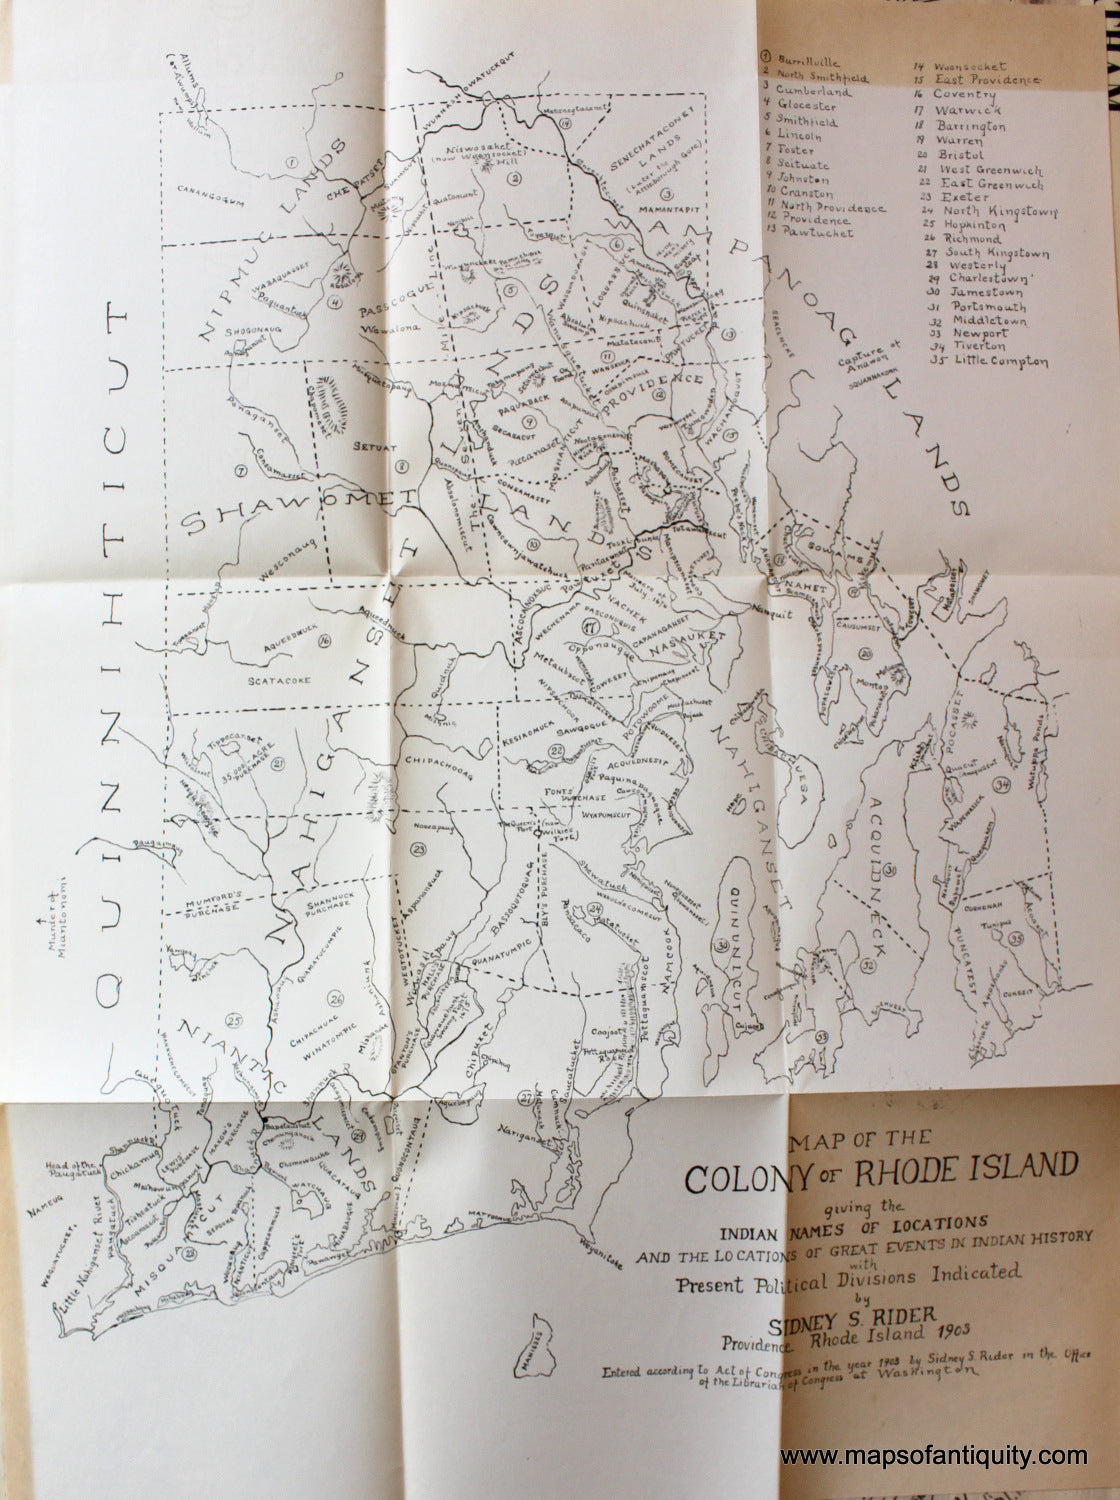 Black-and-White-Antique-Folding-Map-with-Paper-Cover--Map-of-the-Colony-of-Rhode-Island-giving-the-Indian-Names-of-Locations-and-the-Locations-of-Great-Events-in-Indian-History.--Rhode-Island-Folding-Maps-1903-Sidney-Rider-Maps-Of-Antiquity